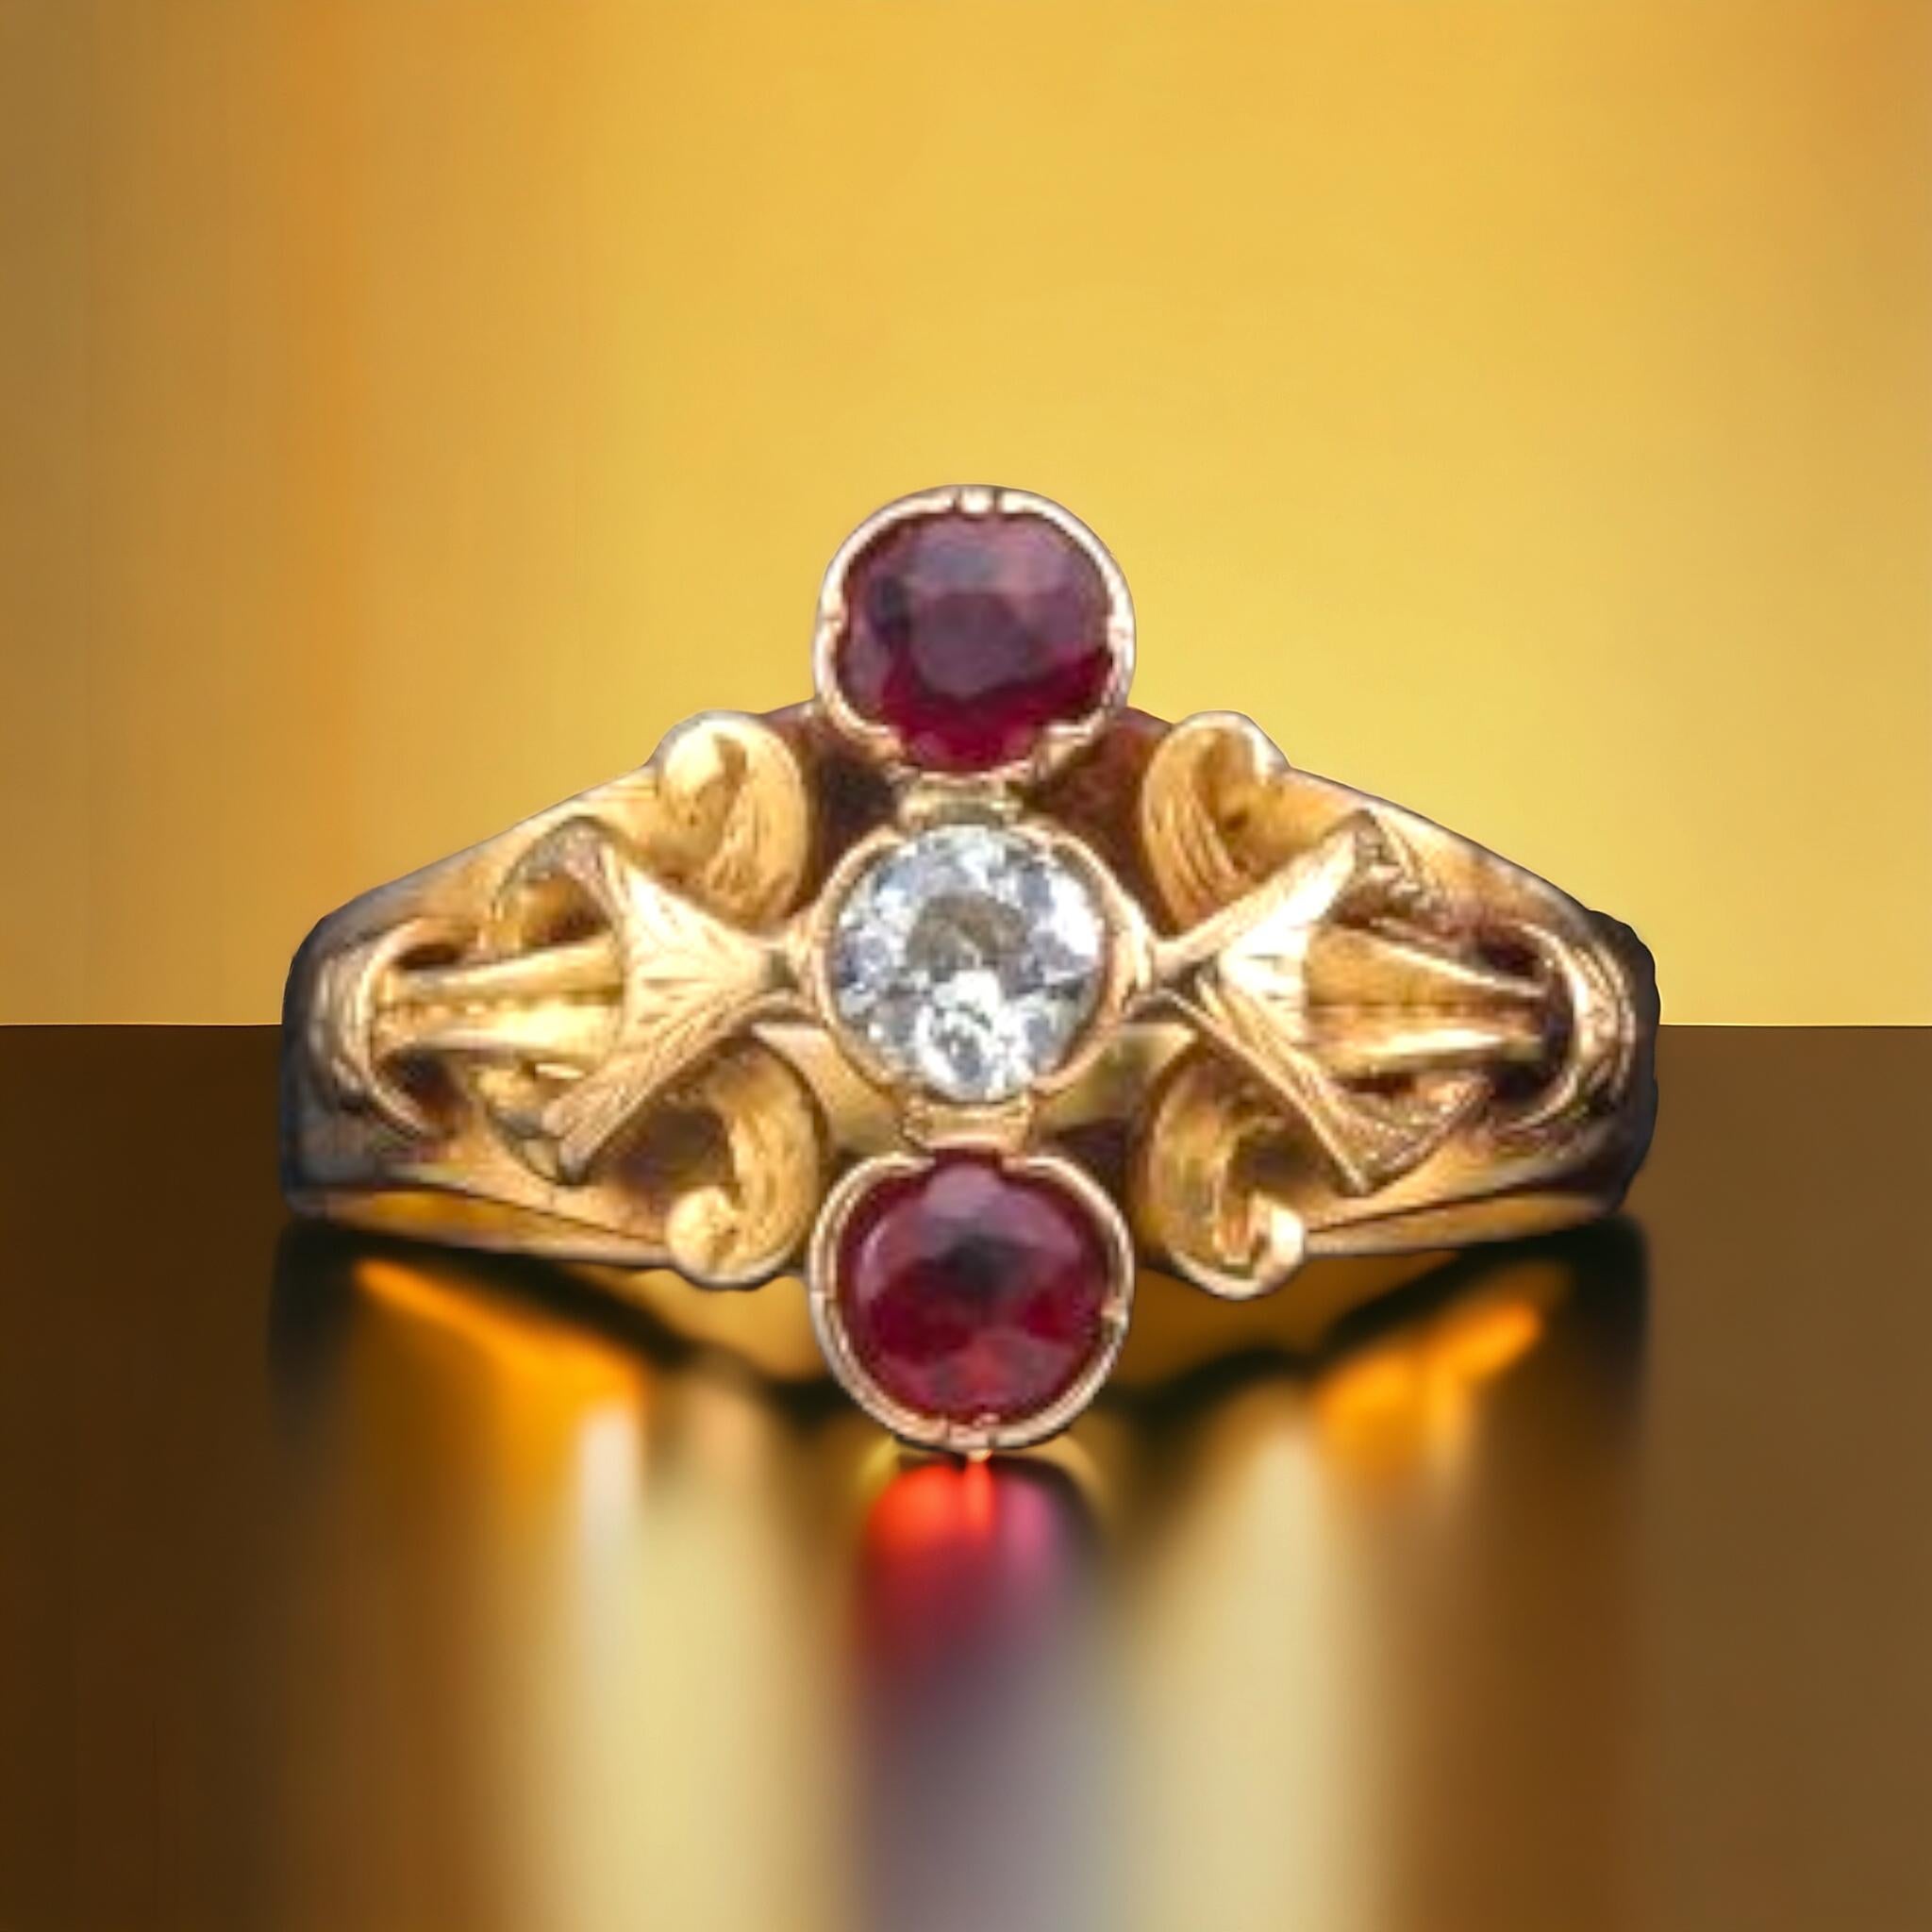 VINTAGE VICTORIAN STYLE RUBY AND DIAMOND THREE STONE RING
Fine elongated shape with 2 bright, vibrant deep red round-shaped rubies to the north and south of a total approx. weight of 0.55 carats and one sparkling white old mine-cut diamond in the